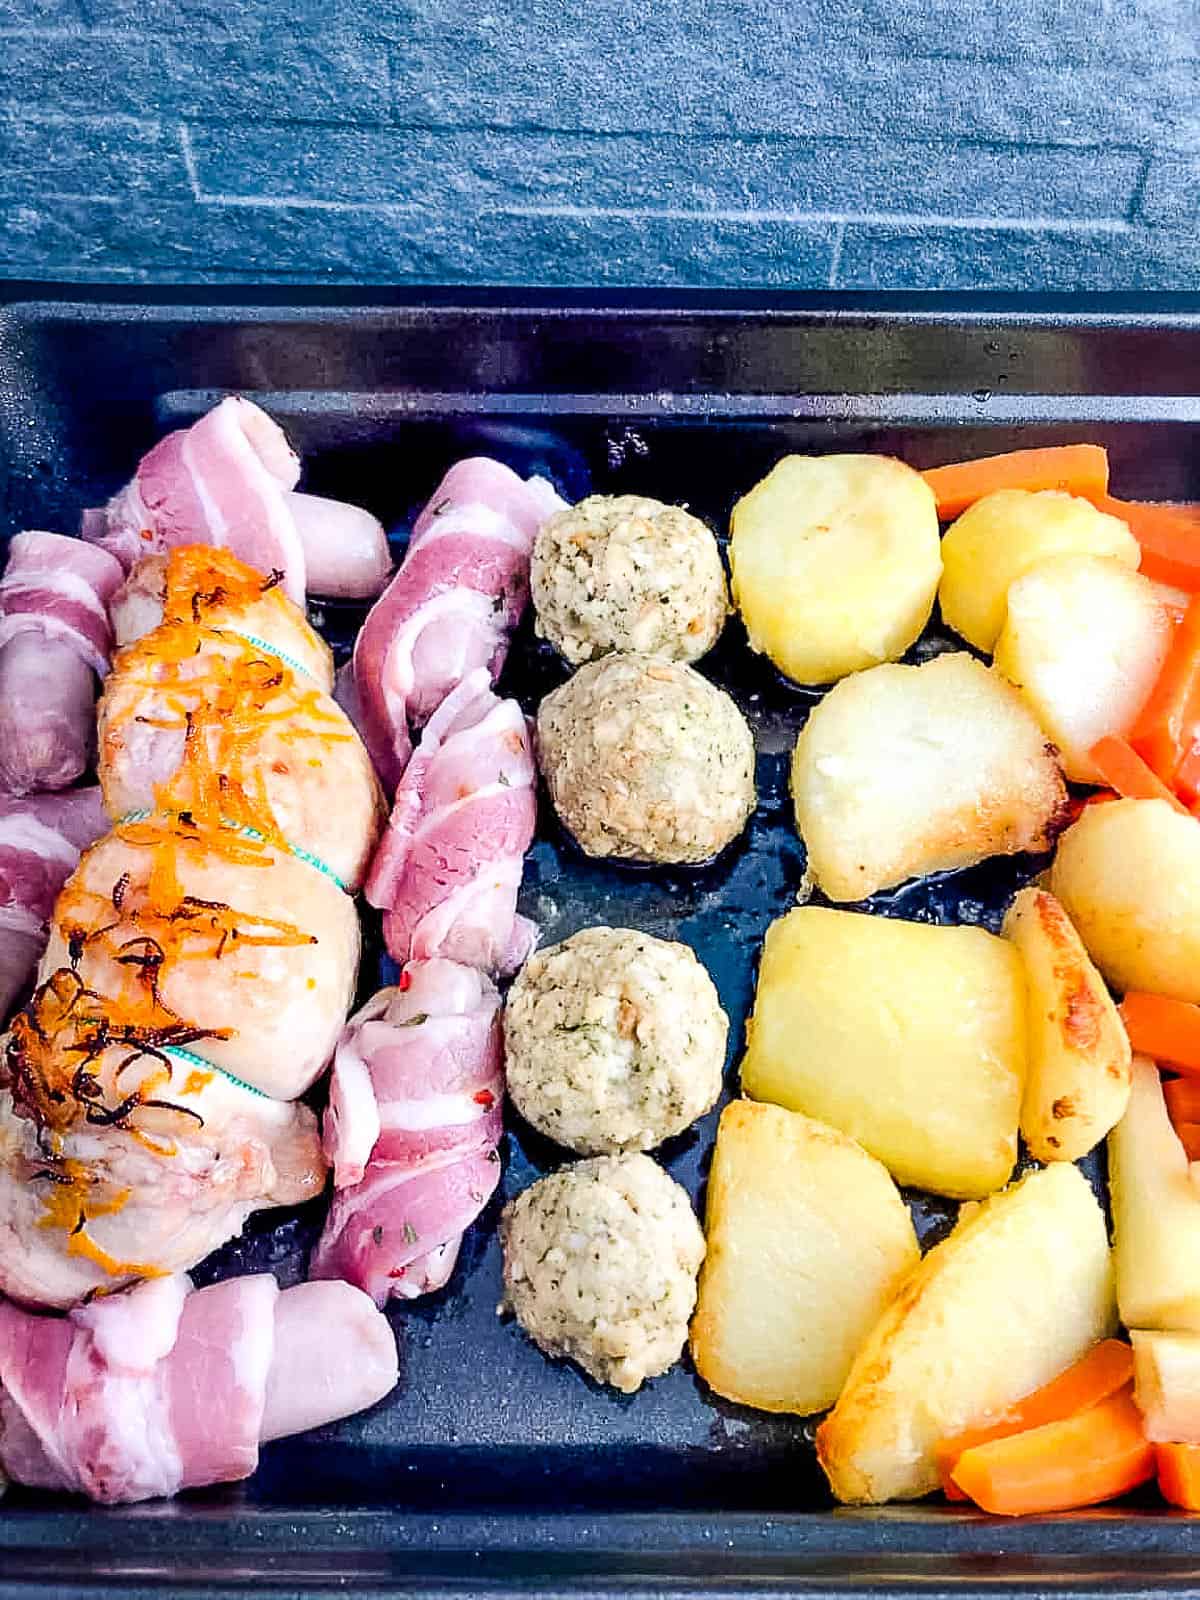 turkey breast pigs in blankets stuffing balls roast potatoes carrots and parsnips in tray.